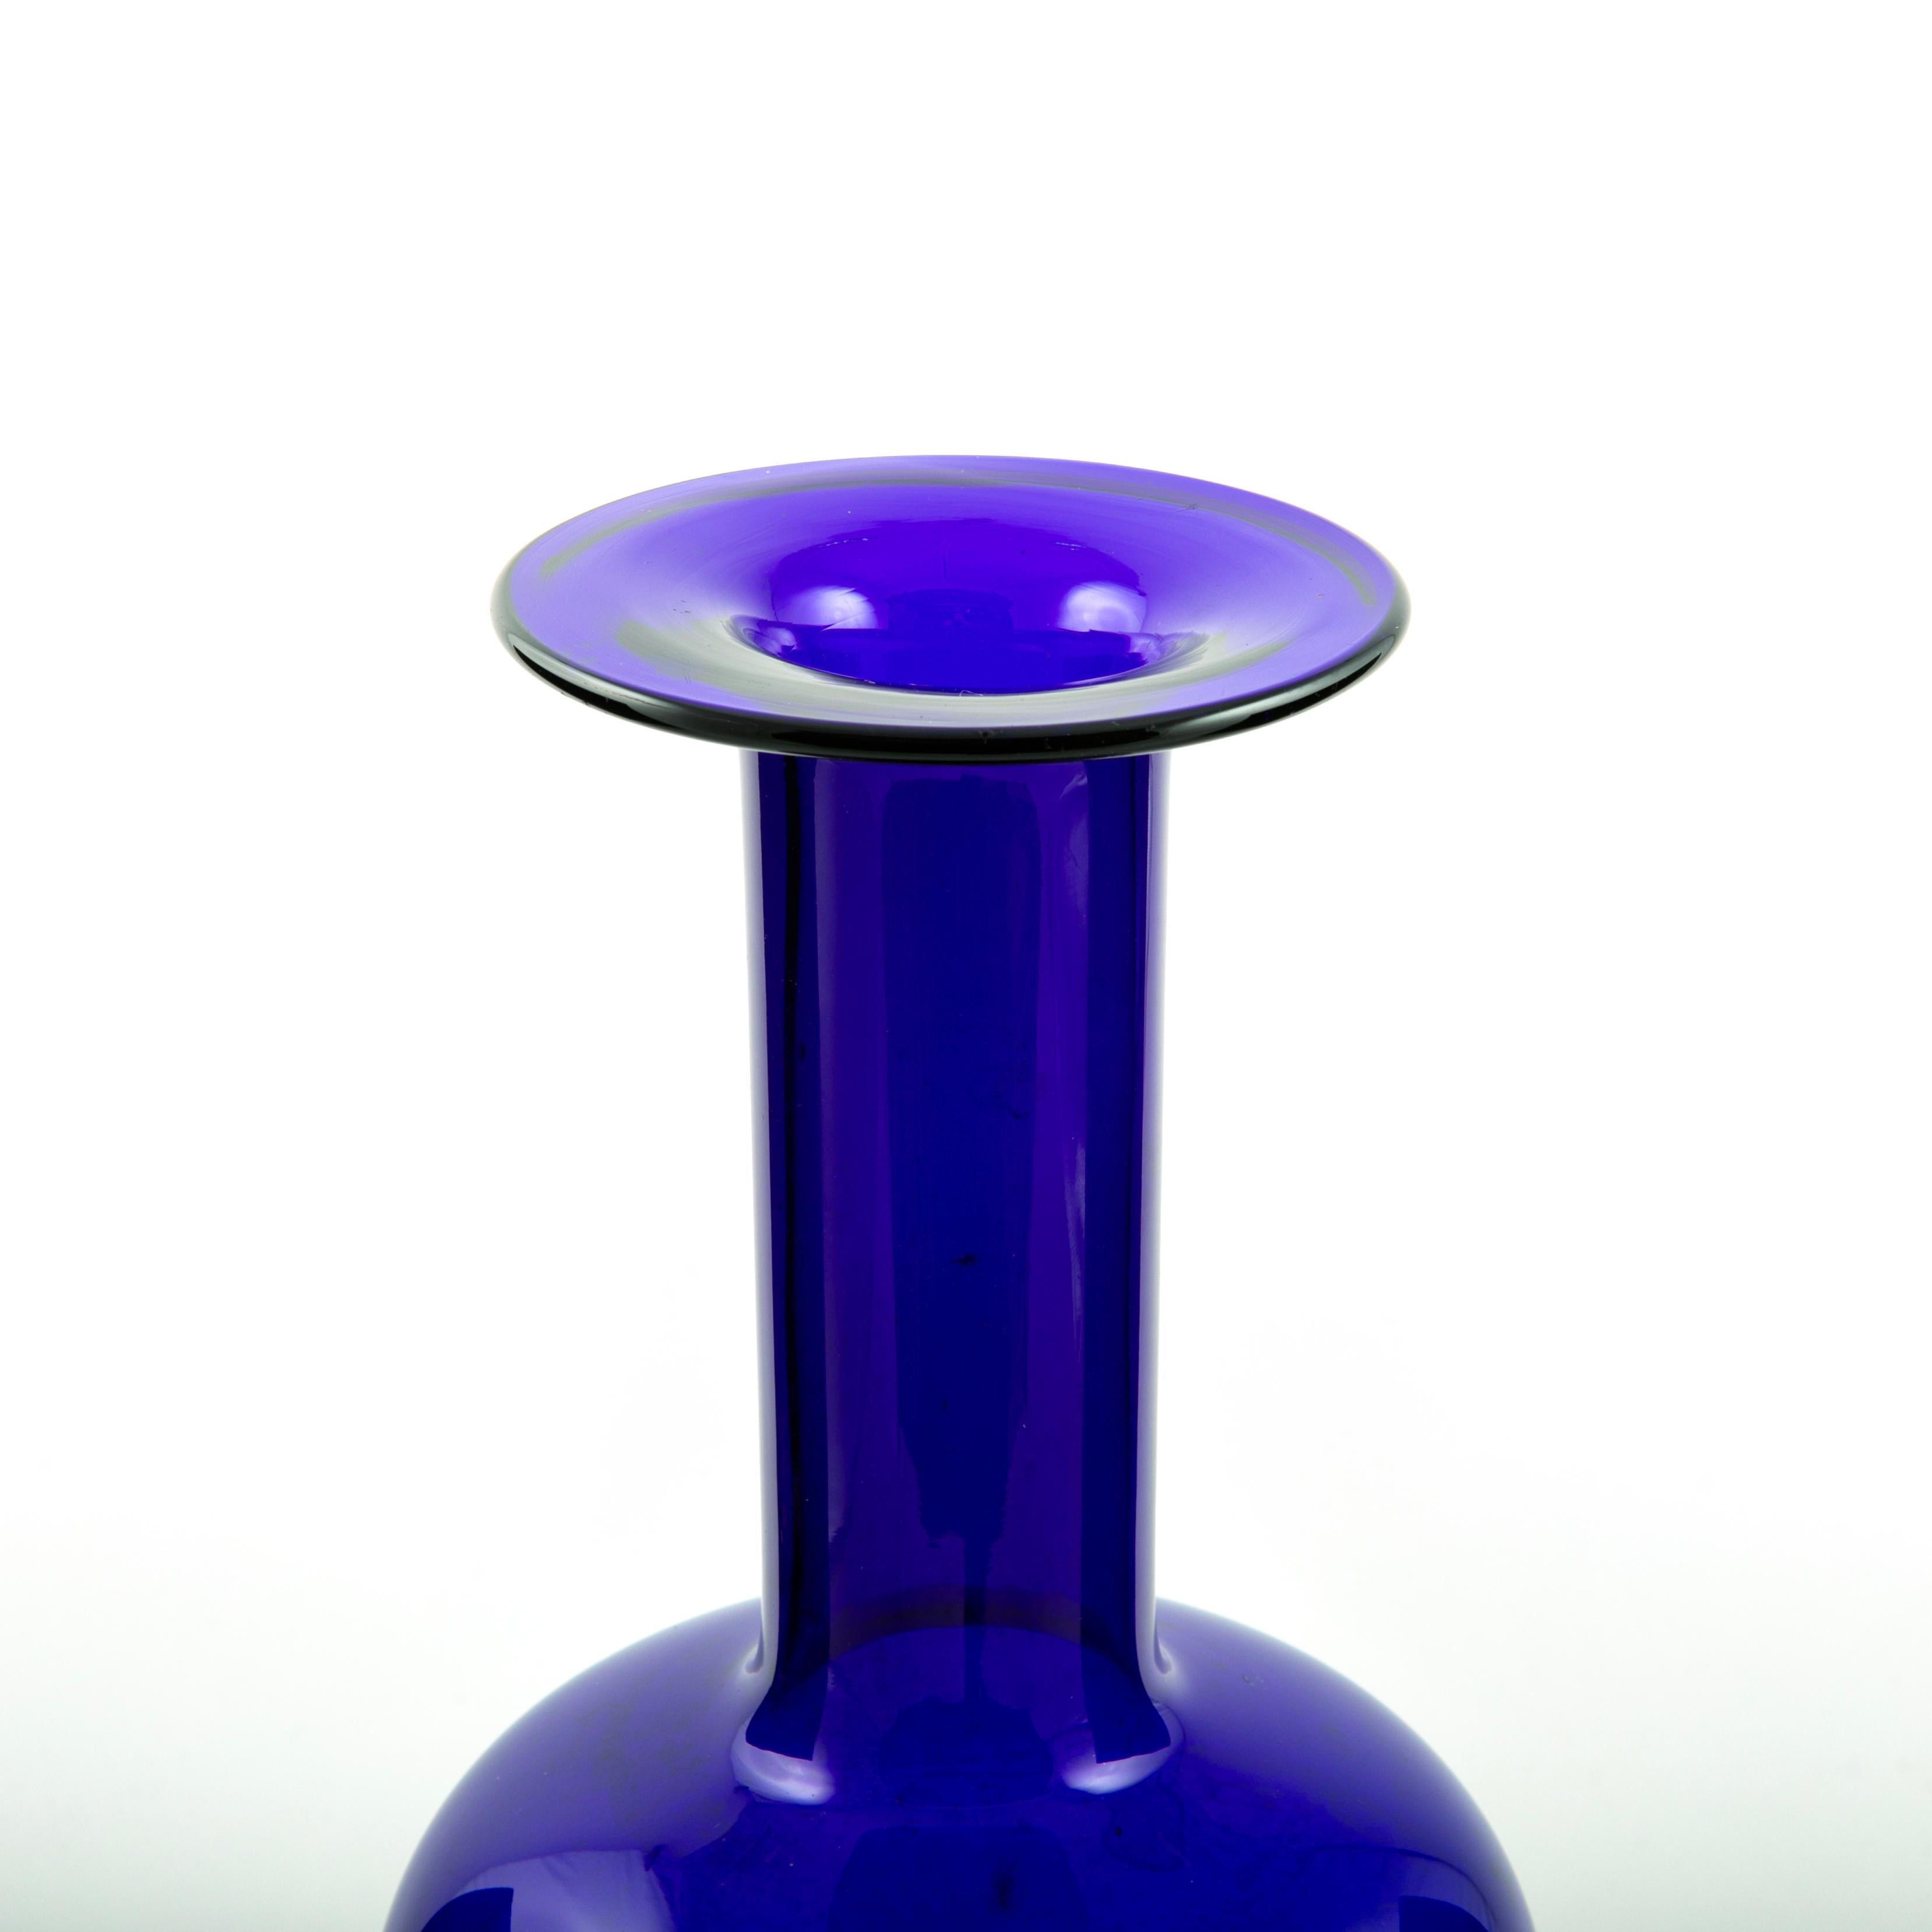 Otto Brauer blue glass vase for Holmegaard design 1959.
Very elegant in it's expression and beautiful color in deep blue glass.